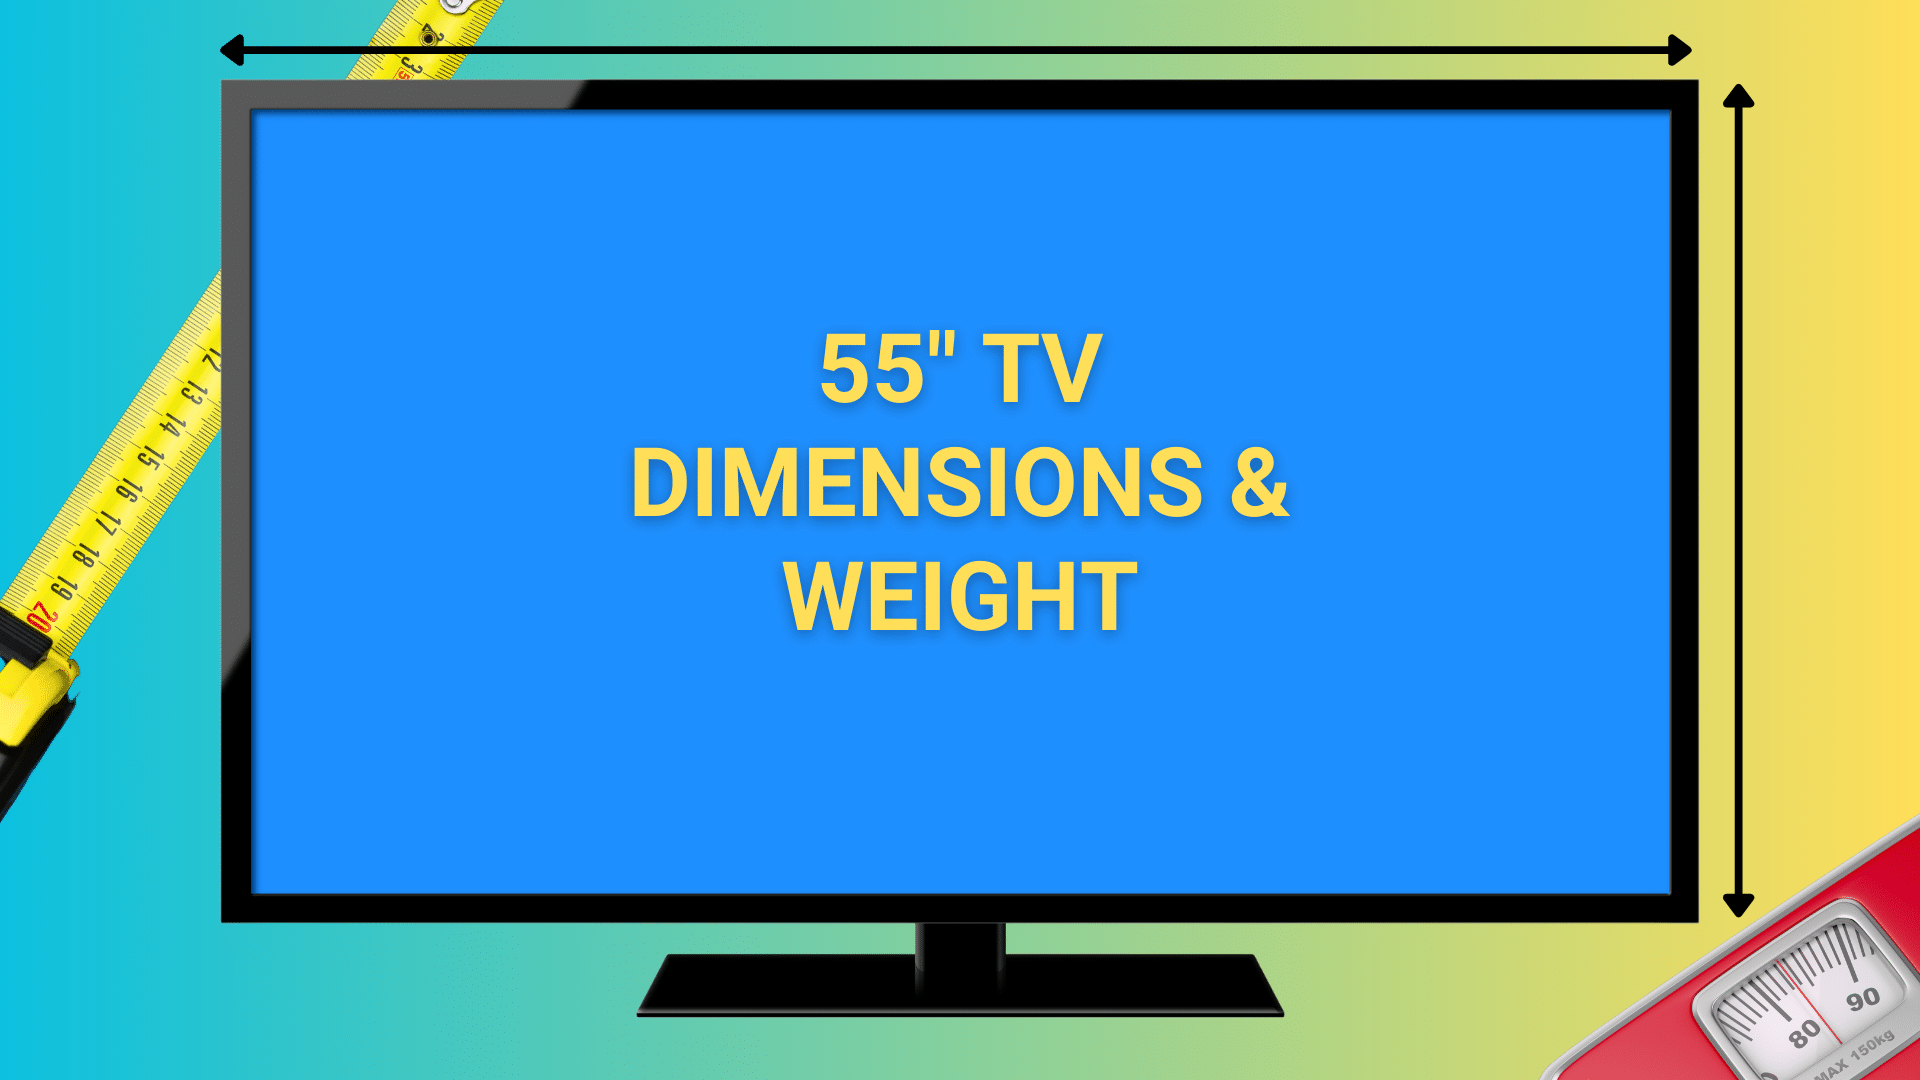 Image of 55 inch TV with measuring tape and bath scale in background.